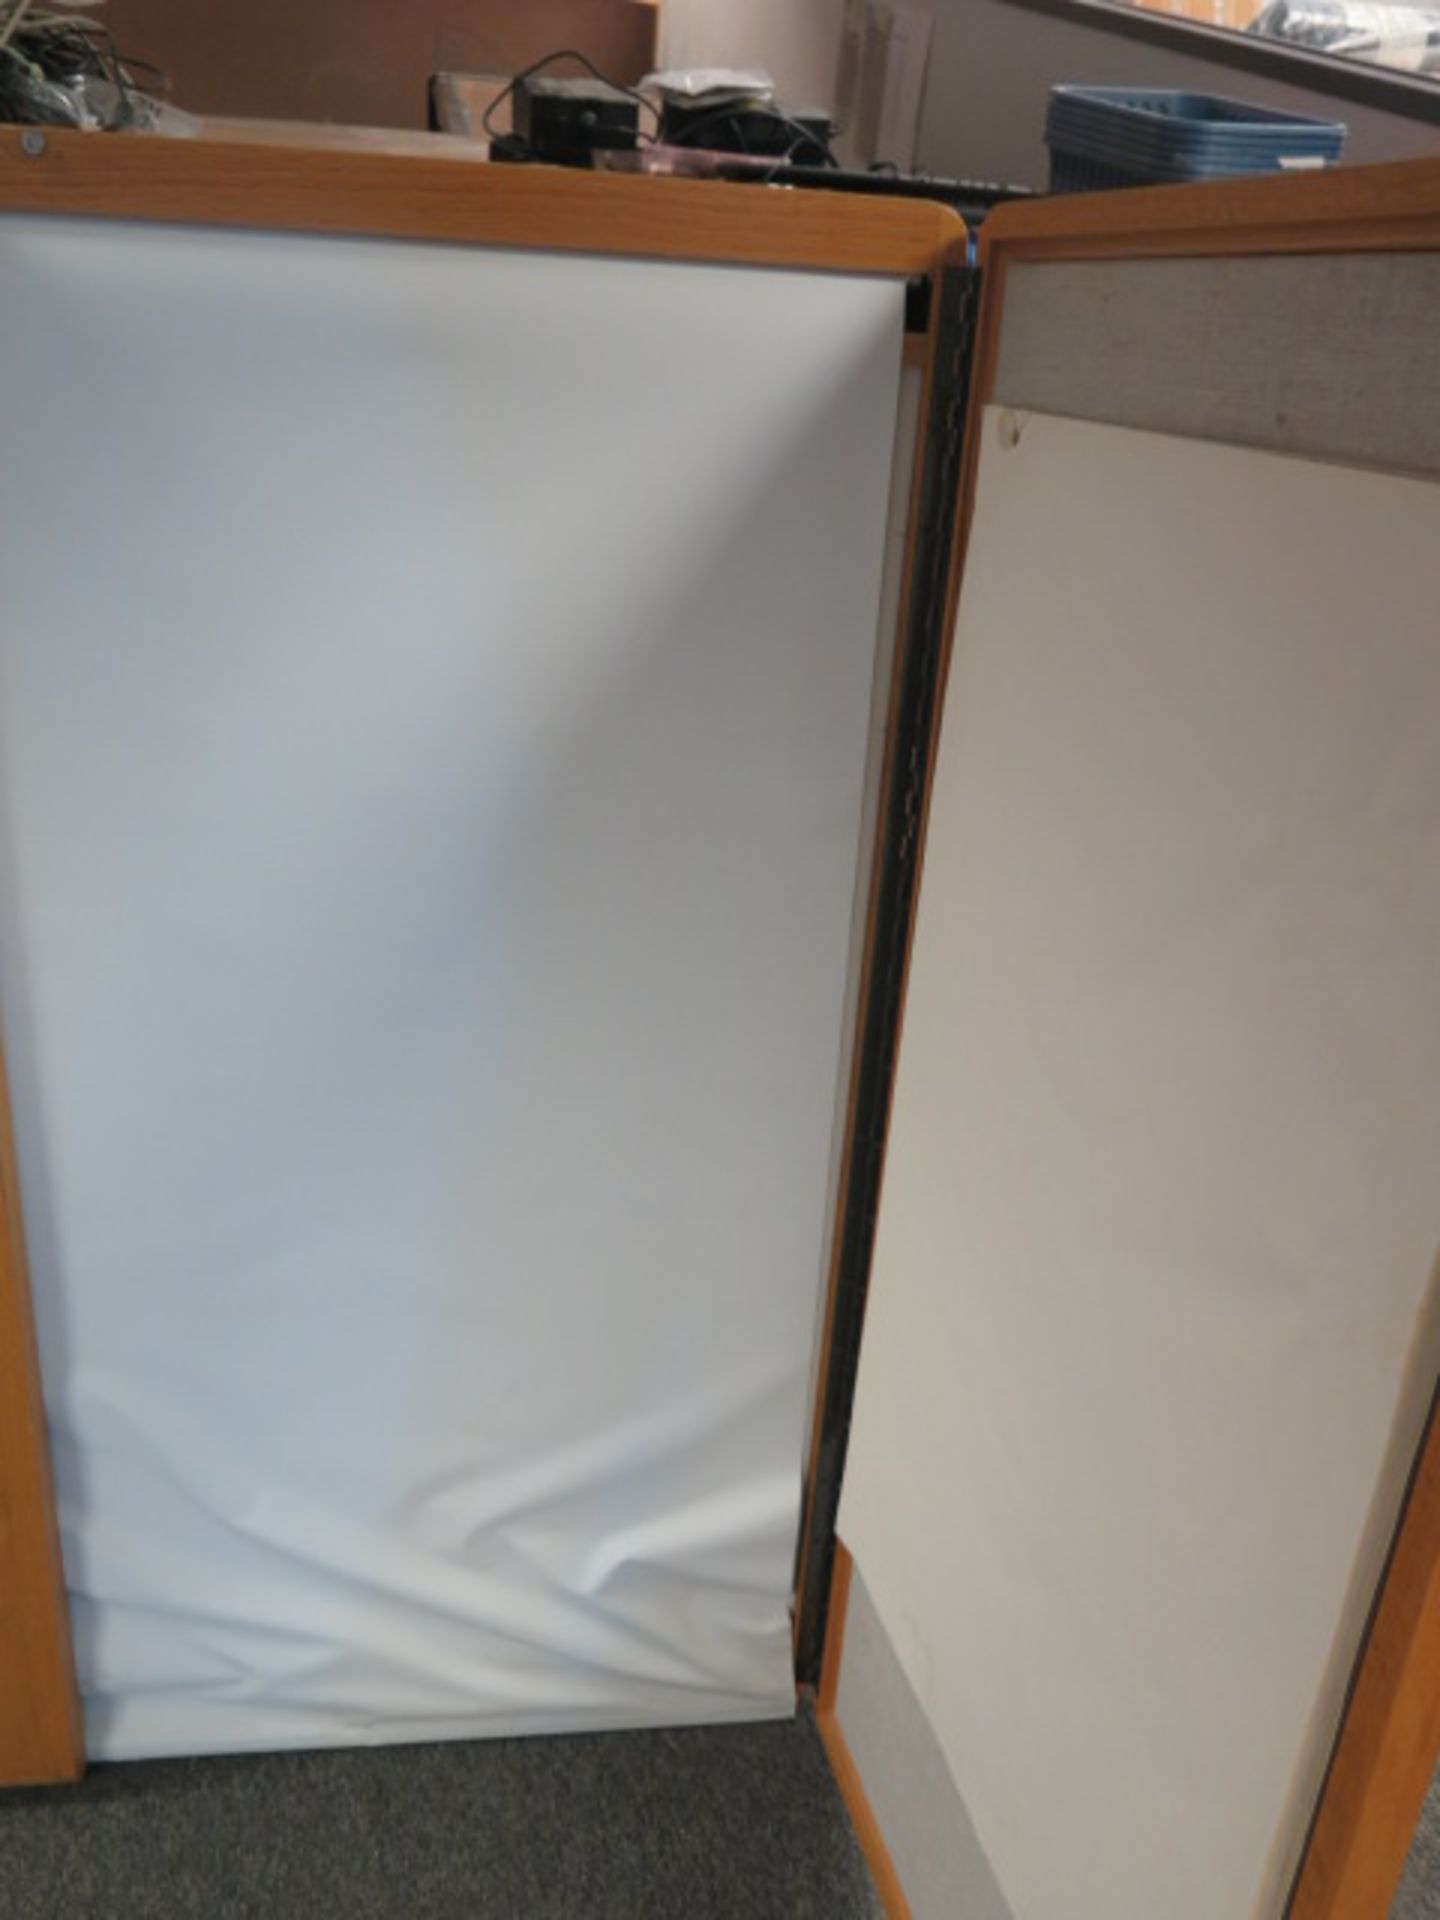 Projection Screen - Image 3 of 3